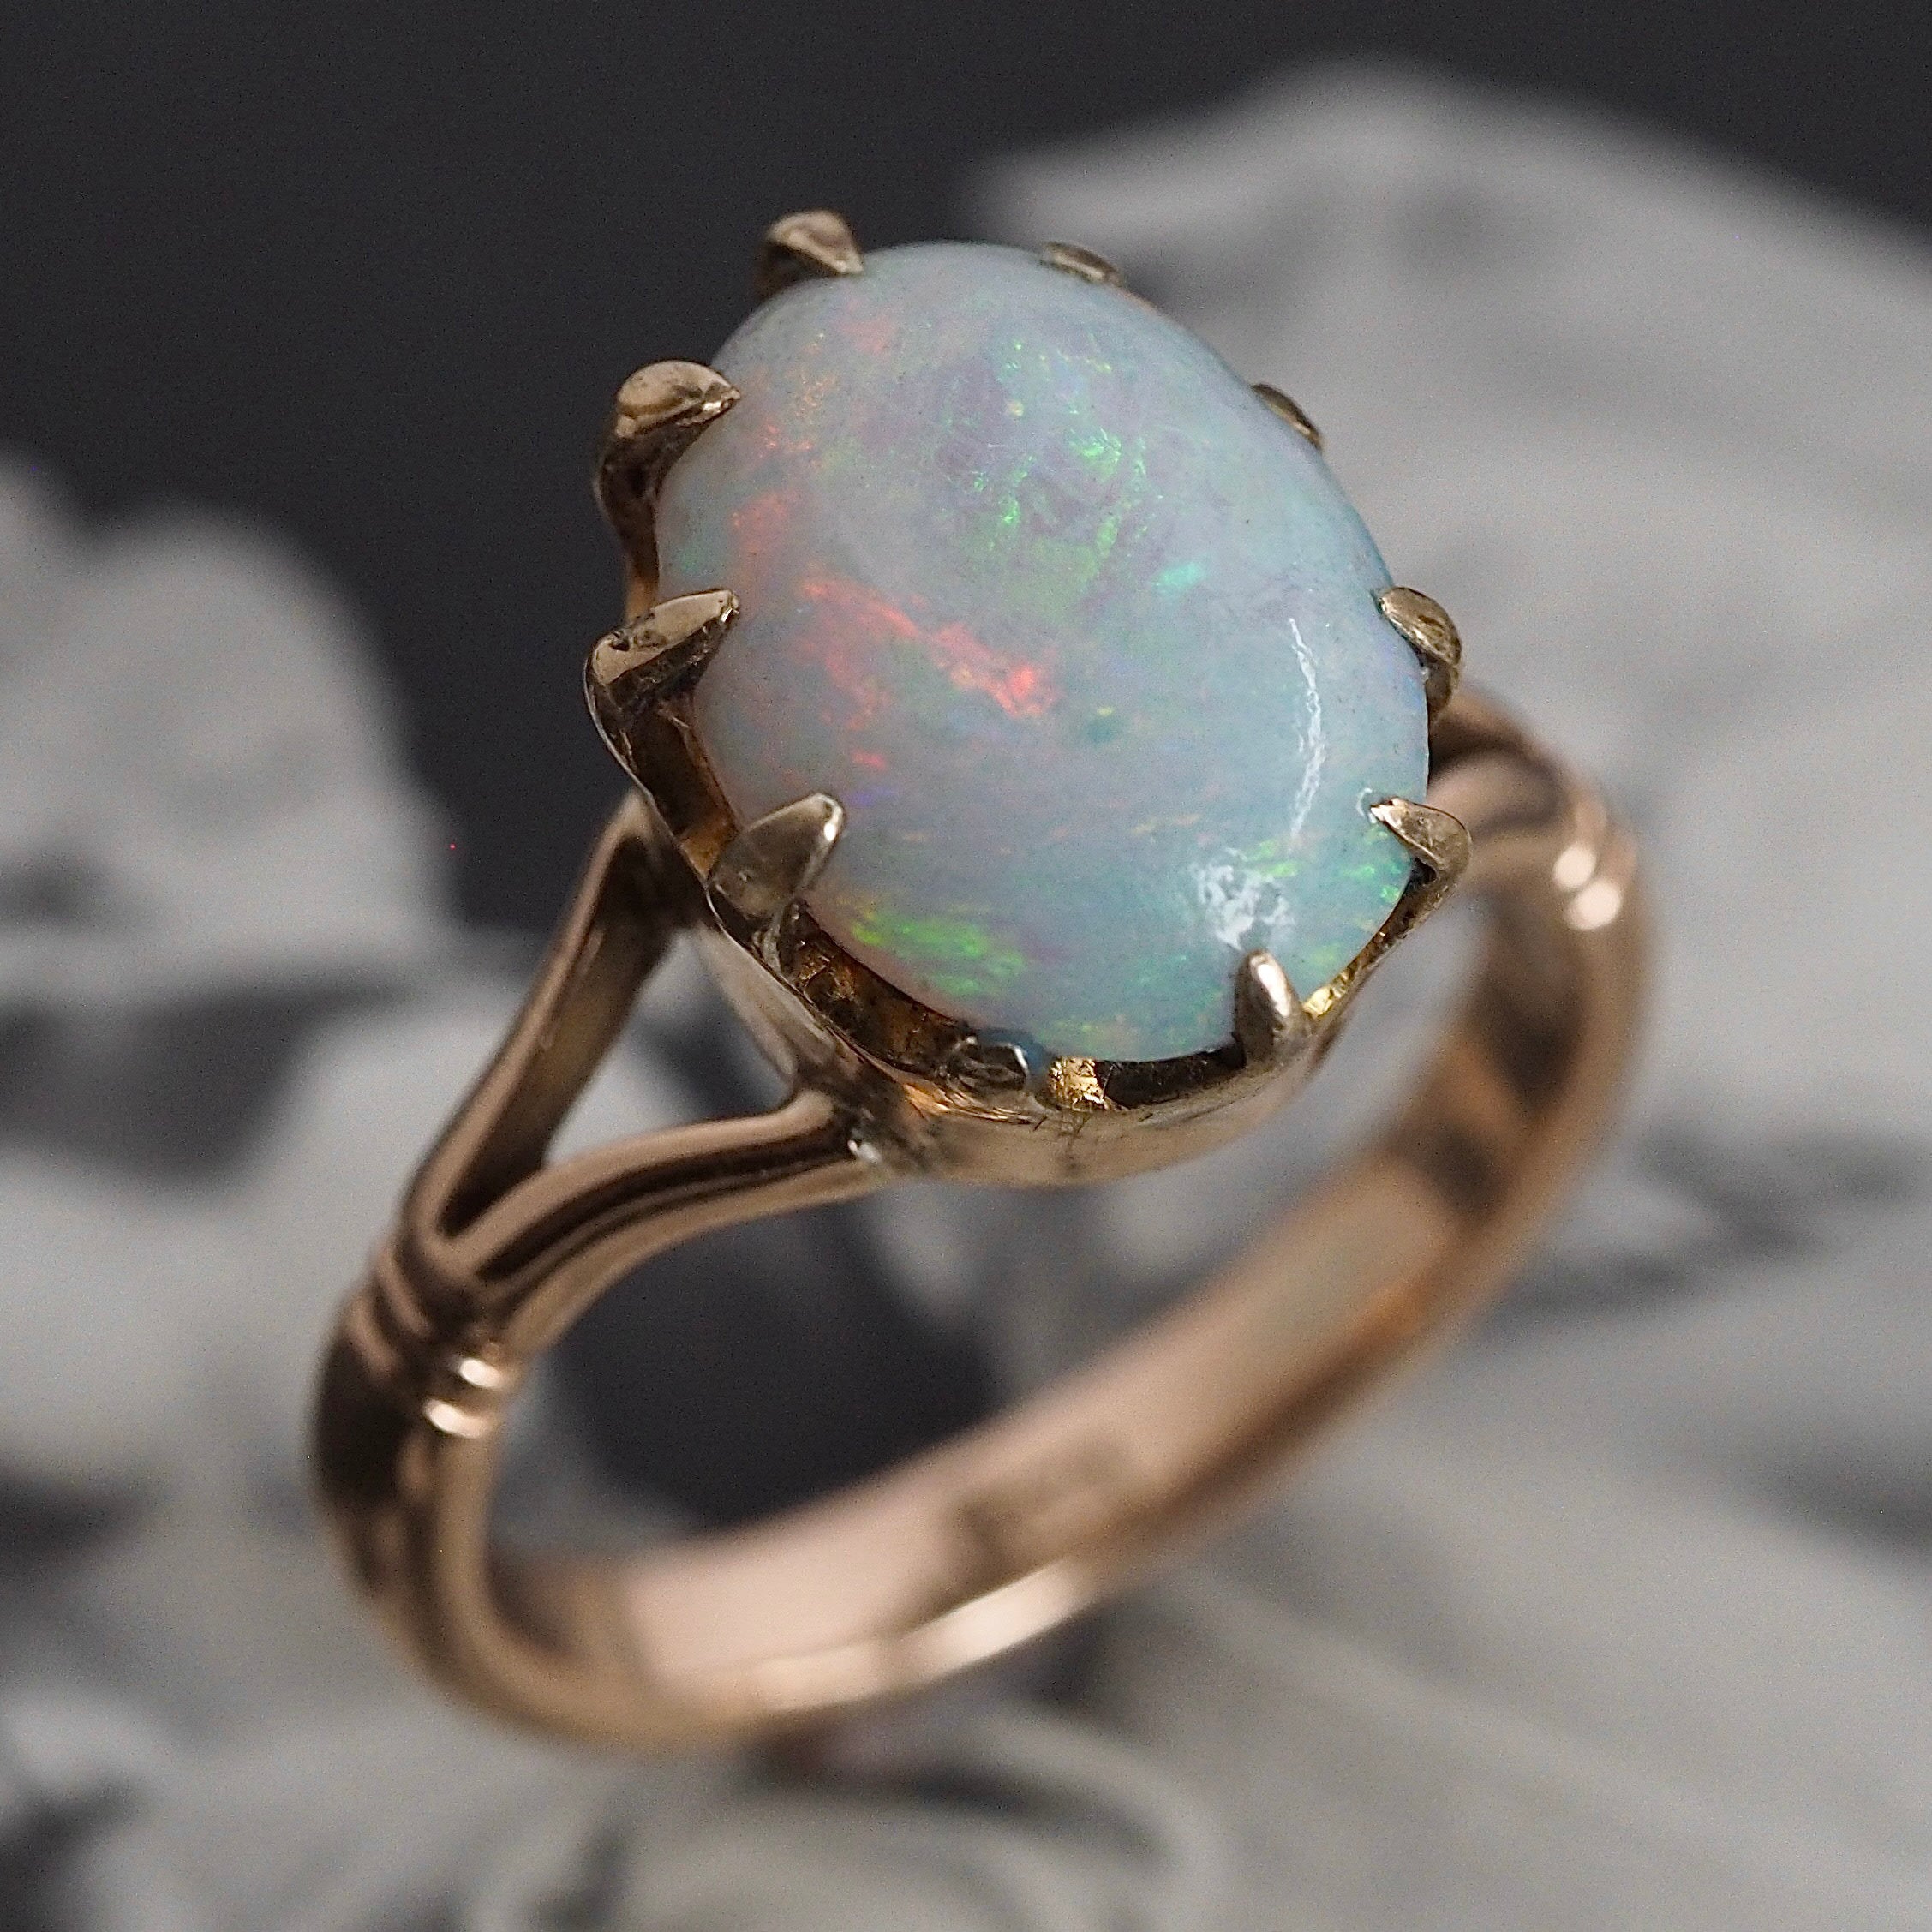 Antique Victorian English 9k Gold Opal Ring